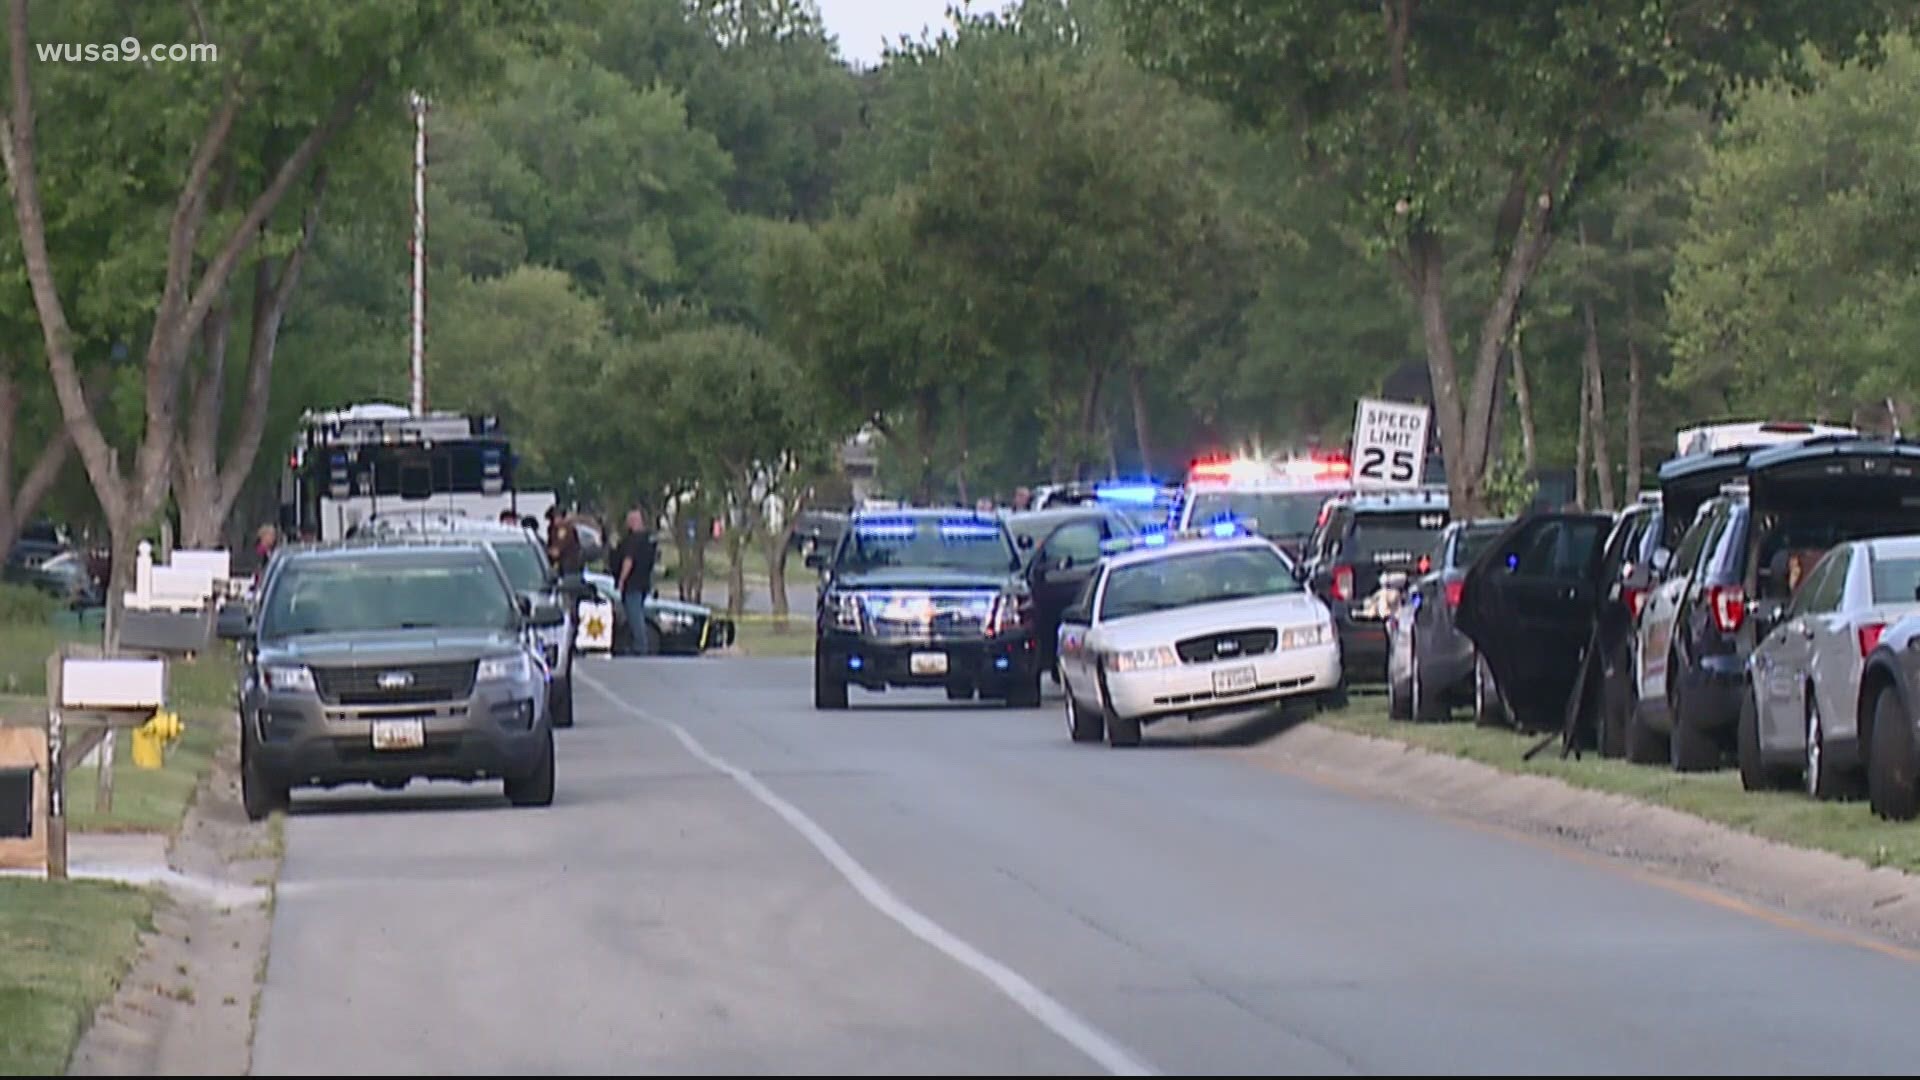 The two officers were seriously injured during a shooting after they were sent to serve a warrant Monday afternoon.